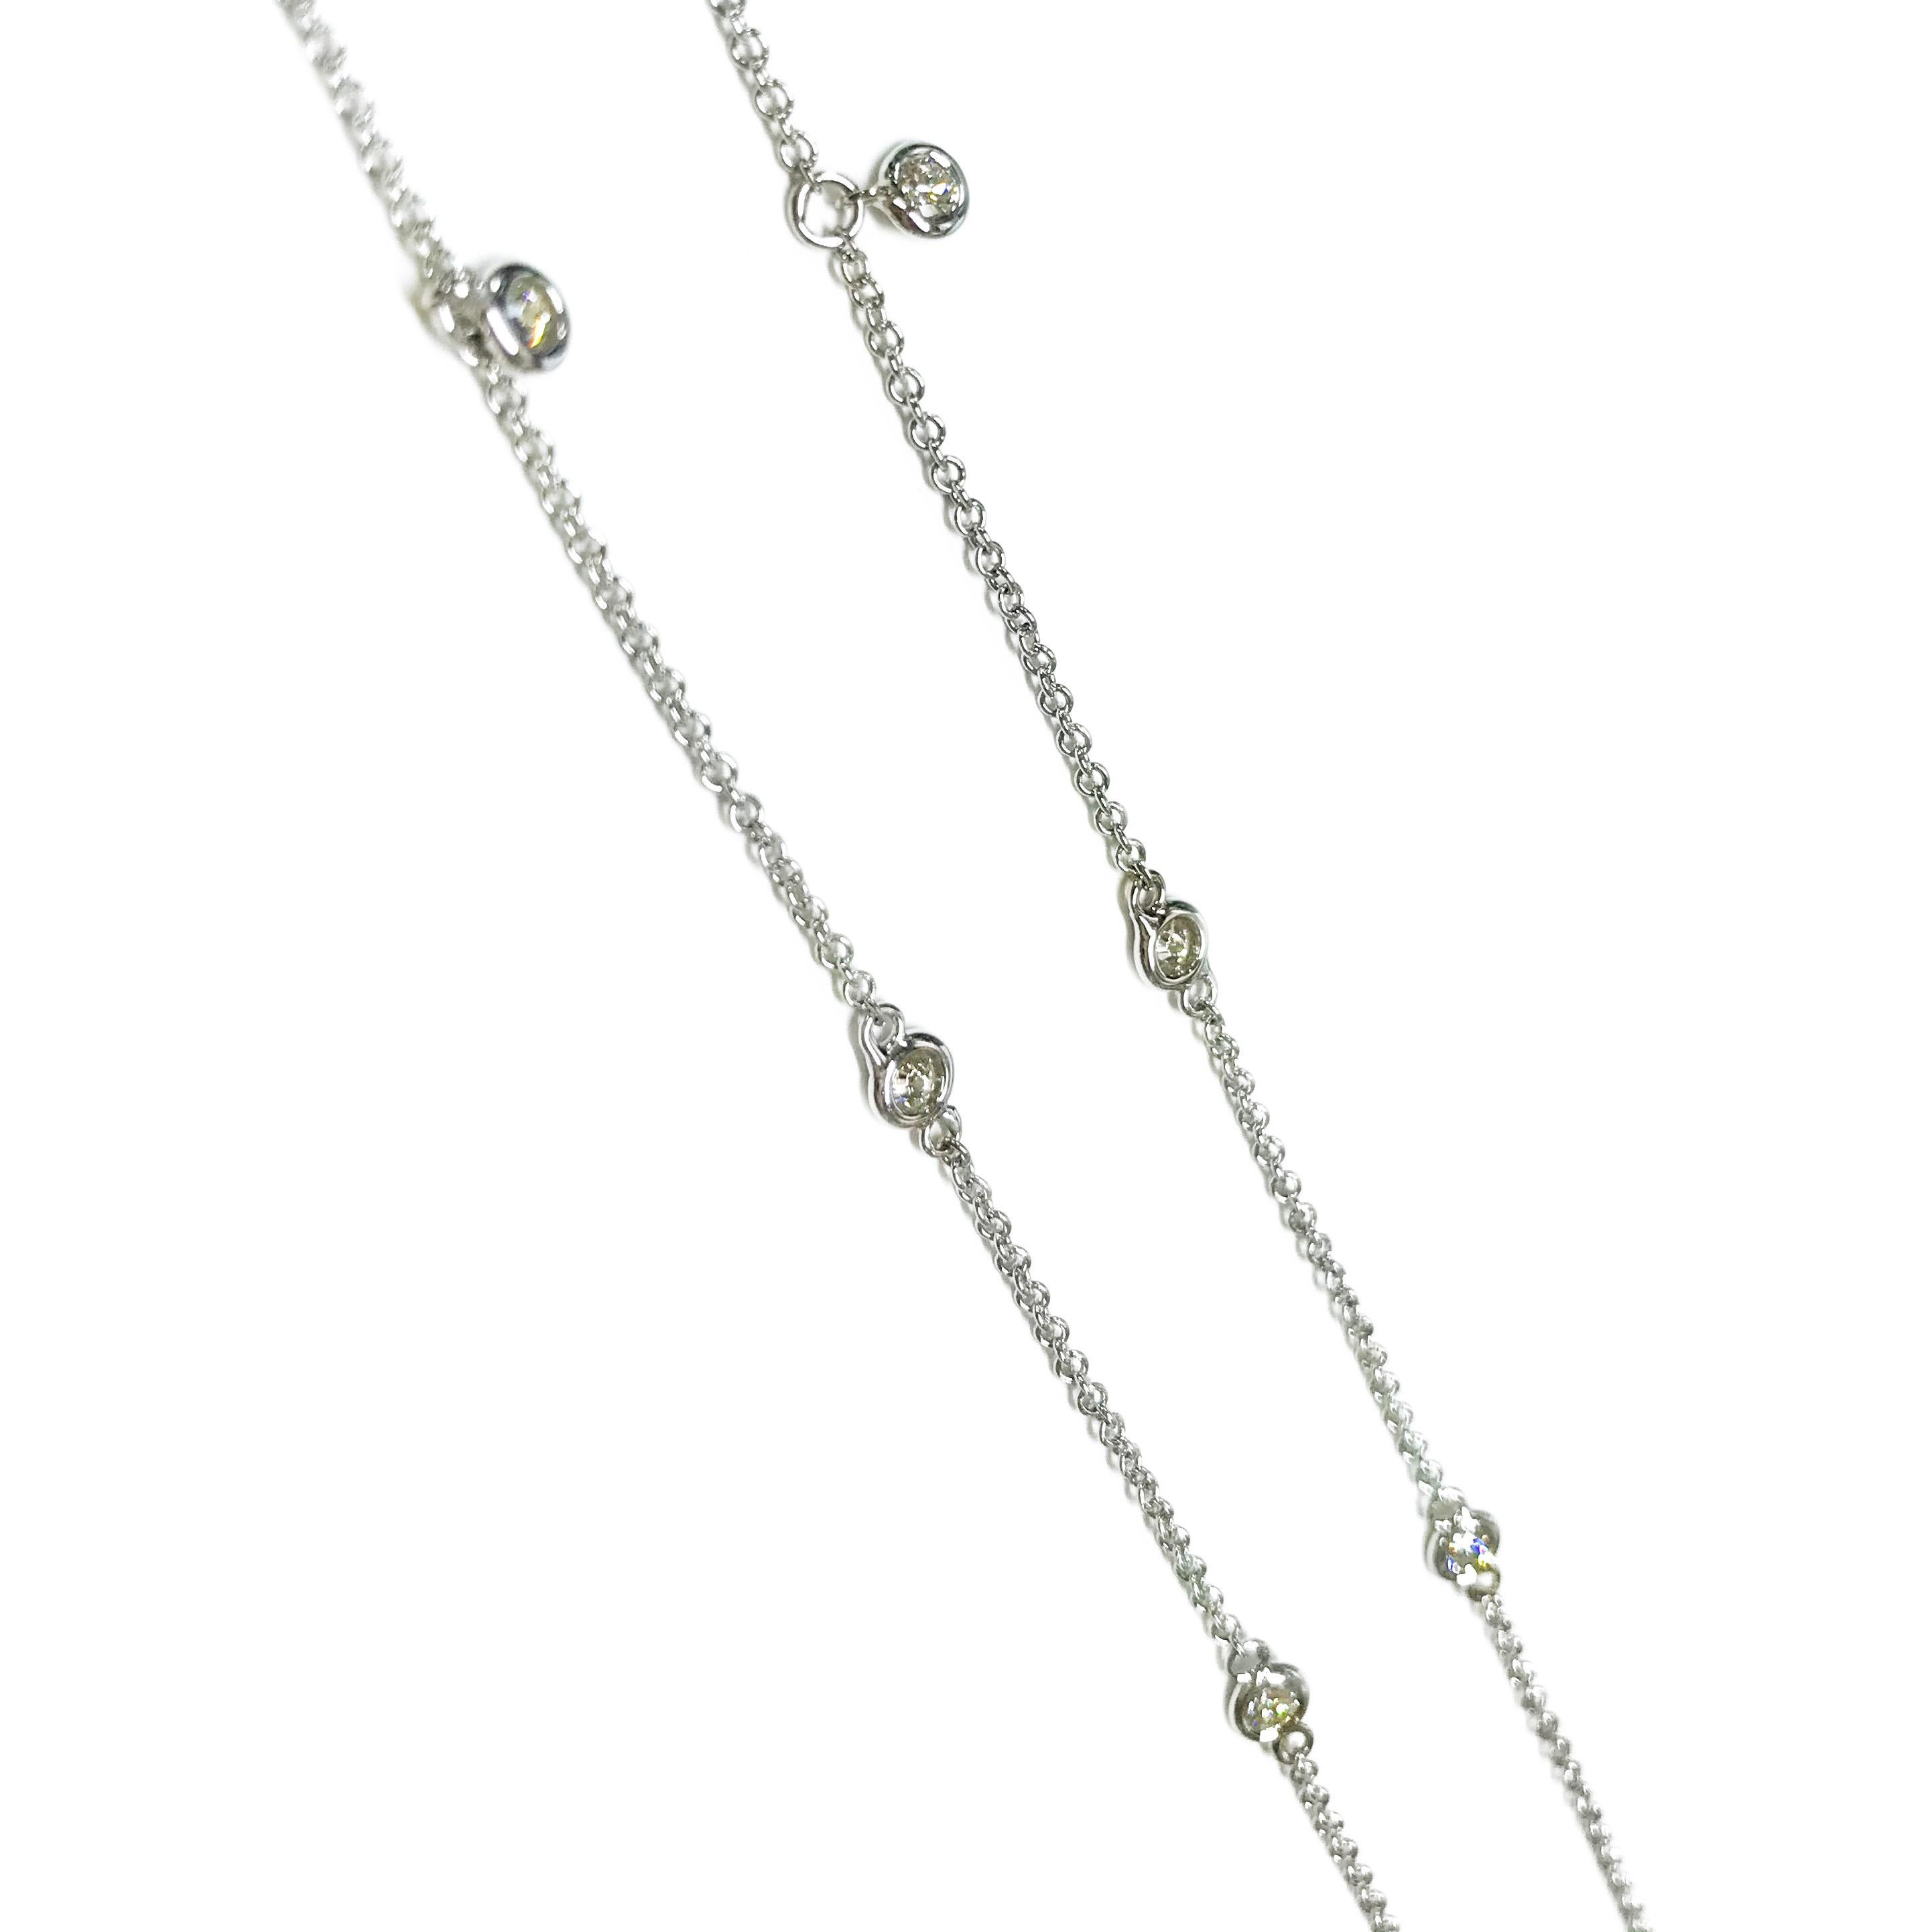 14 Karat White Gold Diamonds By The Inch Necklace. Thirteen exquisite 2.2mm diamonds are showcased in circle stations all in white gold. Diamonds are SI-SI2 (G.I.A.) in clarity and G-H (G.I.A.) in color for a total weight of 0.61ctw. The lower seven